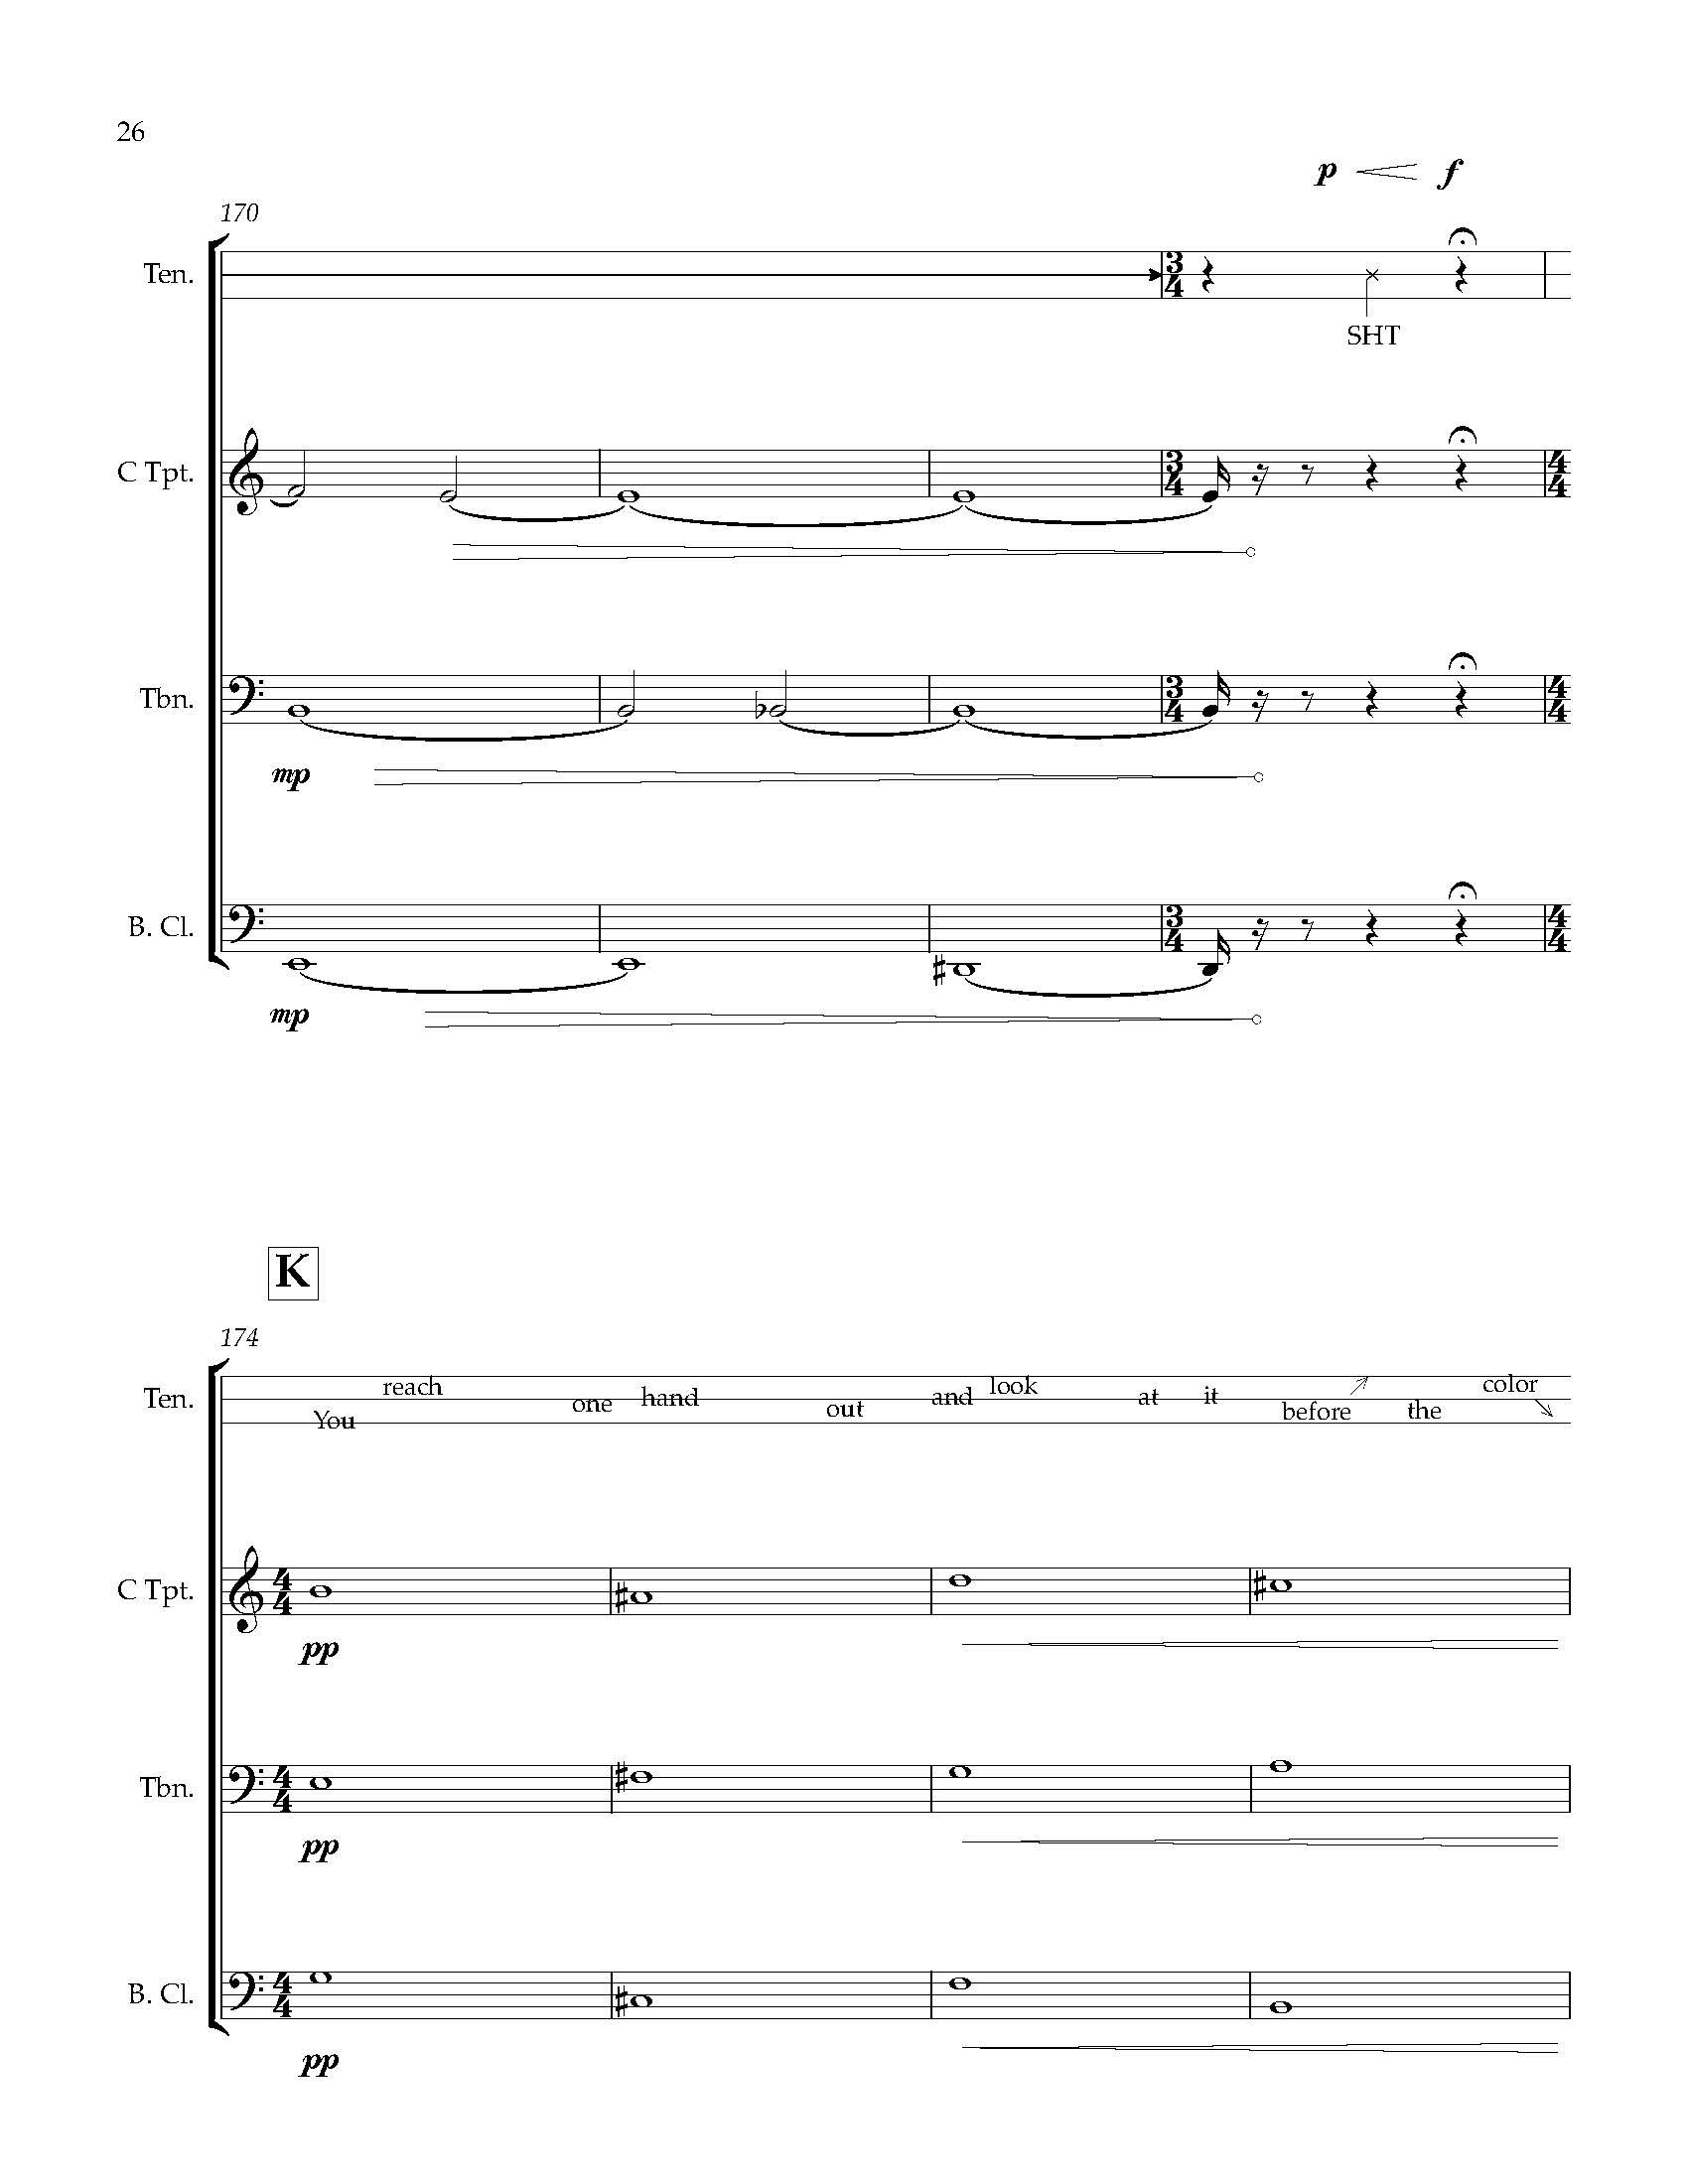 Many Worlds [1] - Complete Score_Page_35.jpg